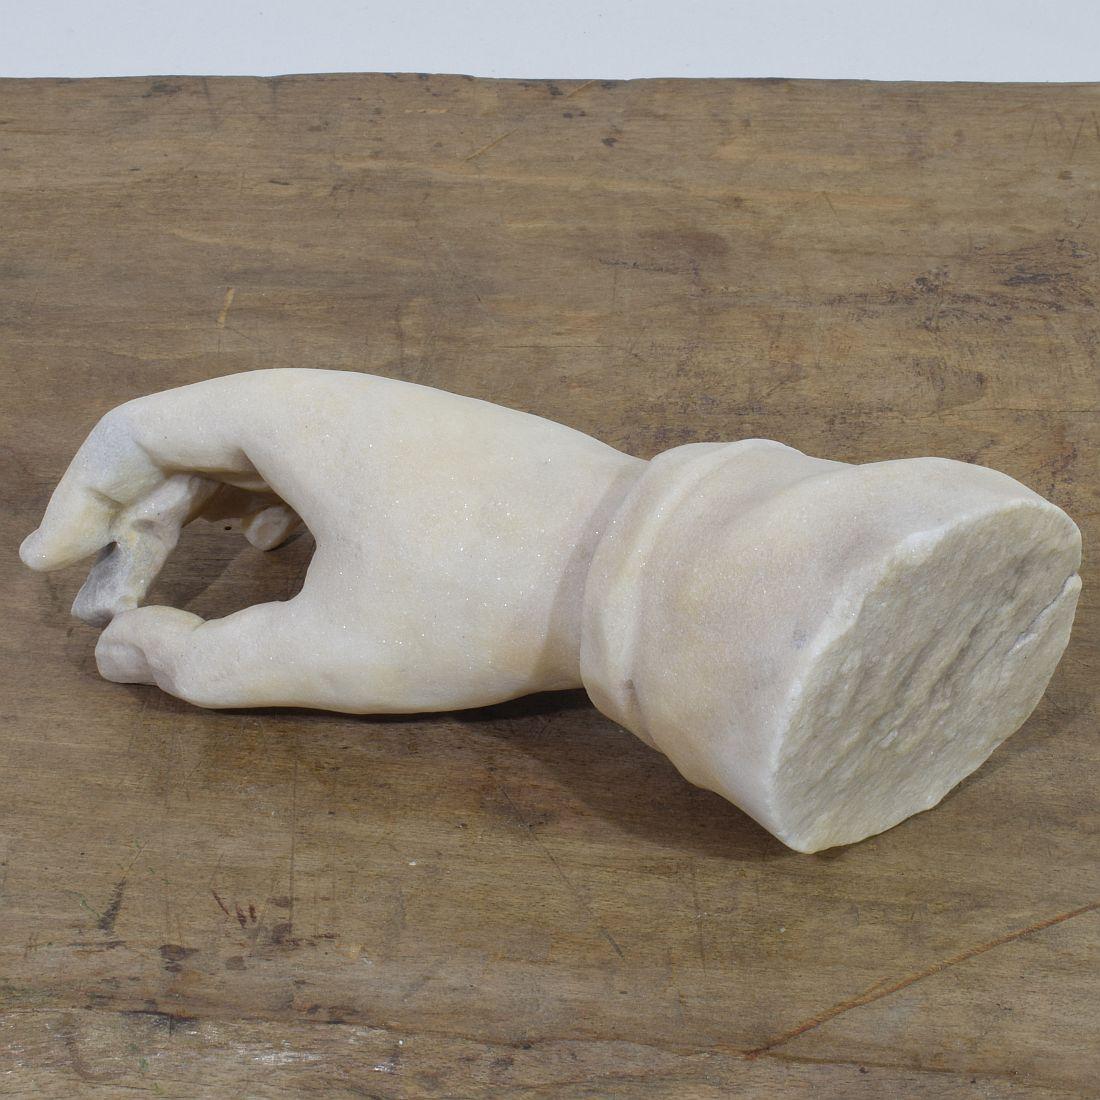 Baroque 17th-18th Century Italian Marble Fragment of a Hand